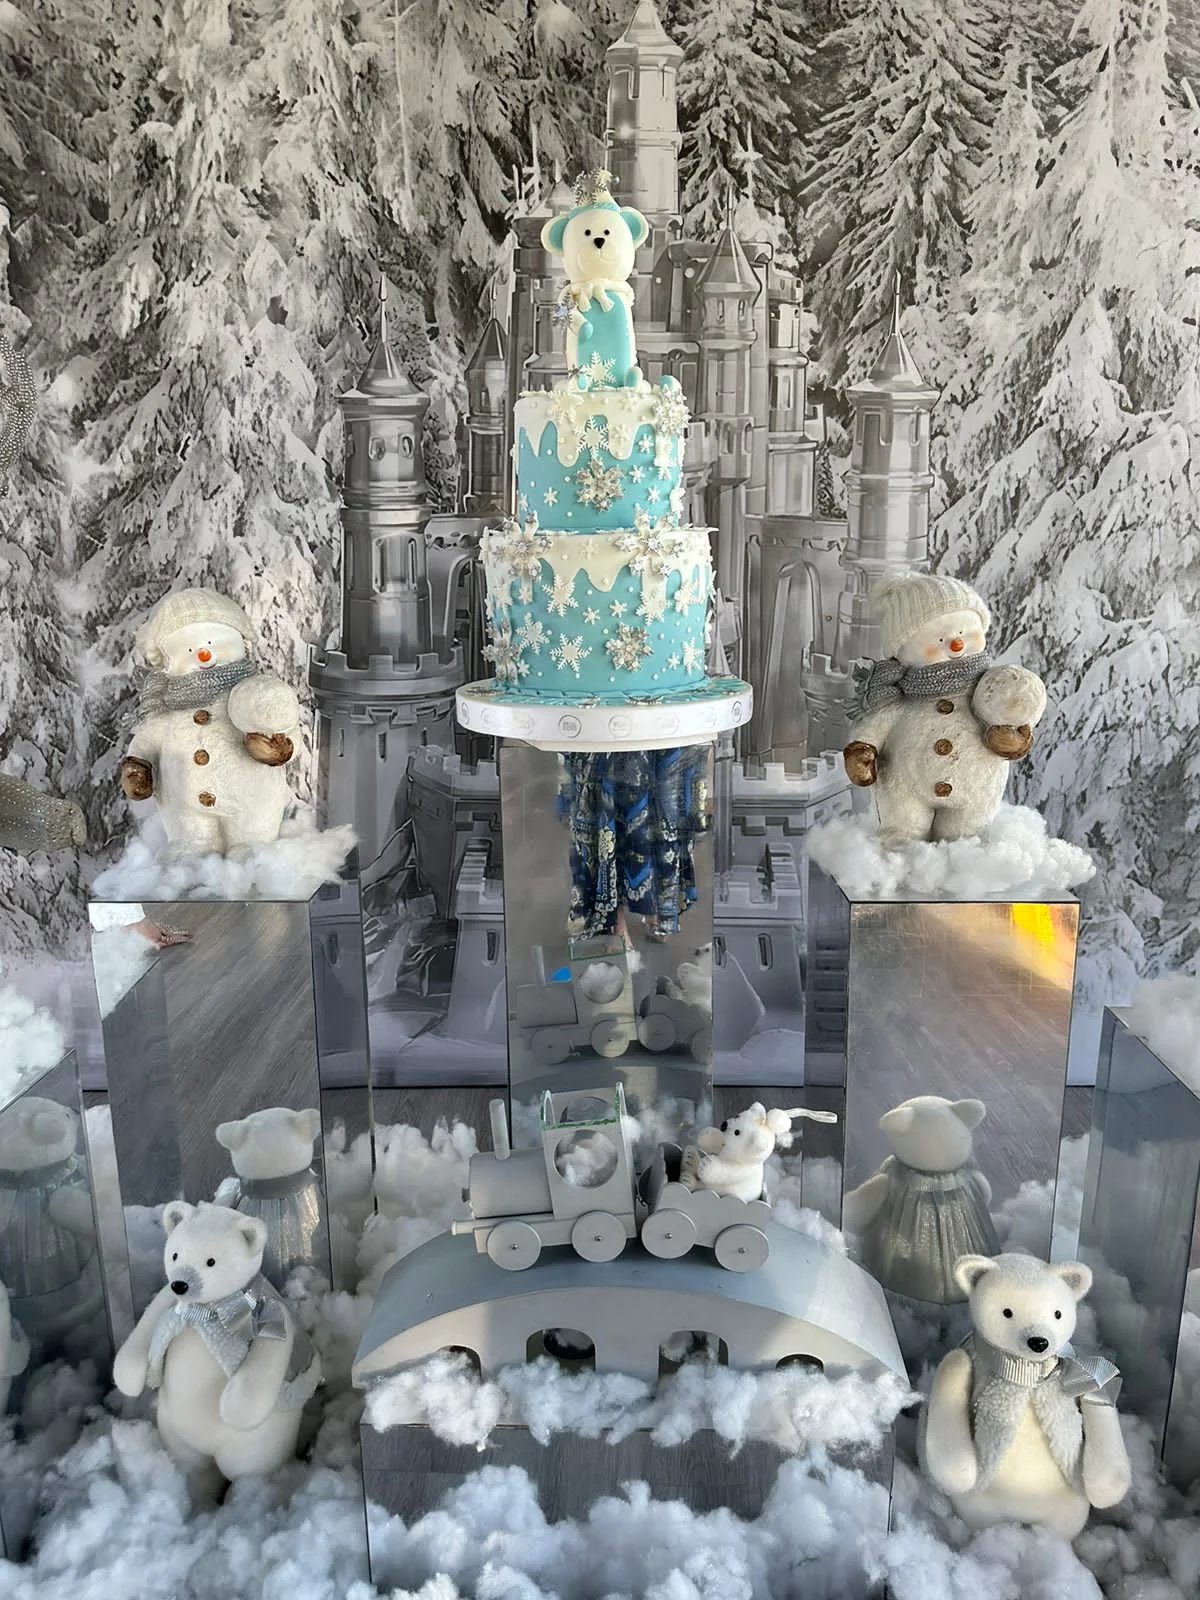 snowman theme cake and decoration